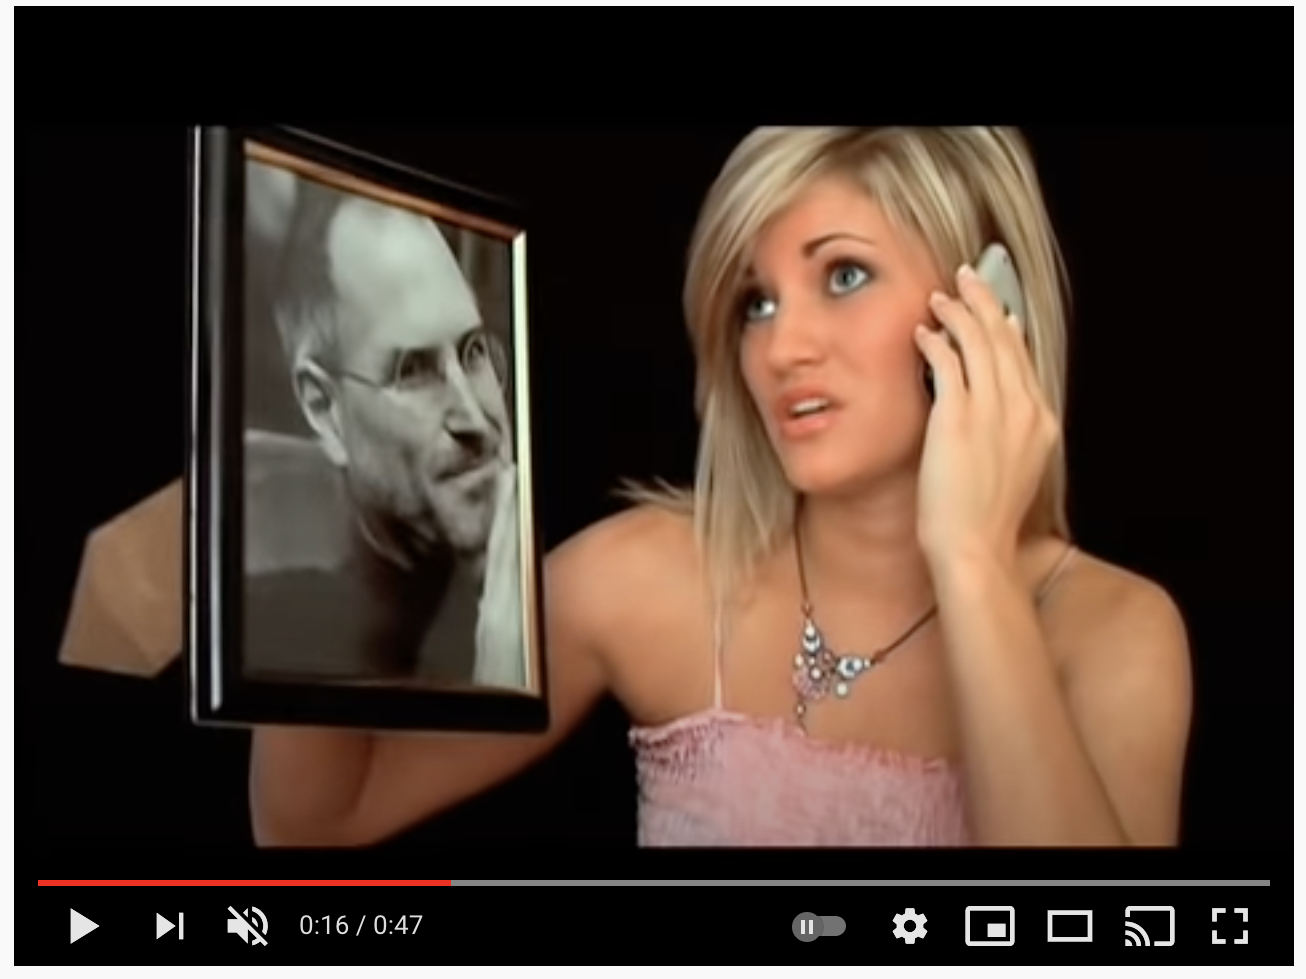 iJustine looks at photo of late Apple co-founder Steve Jobs